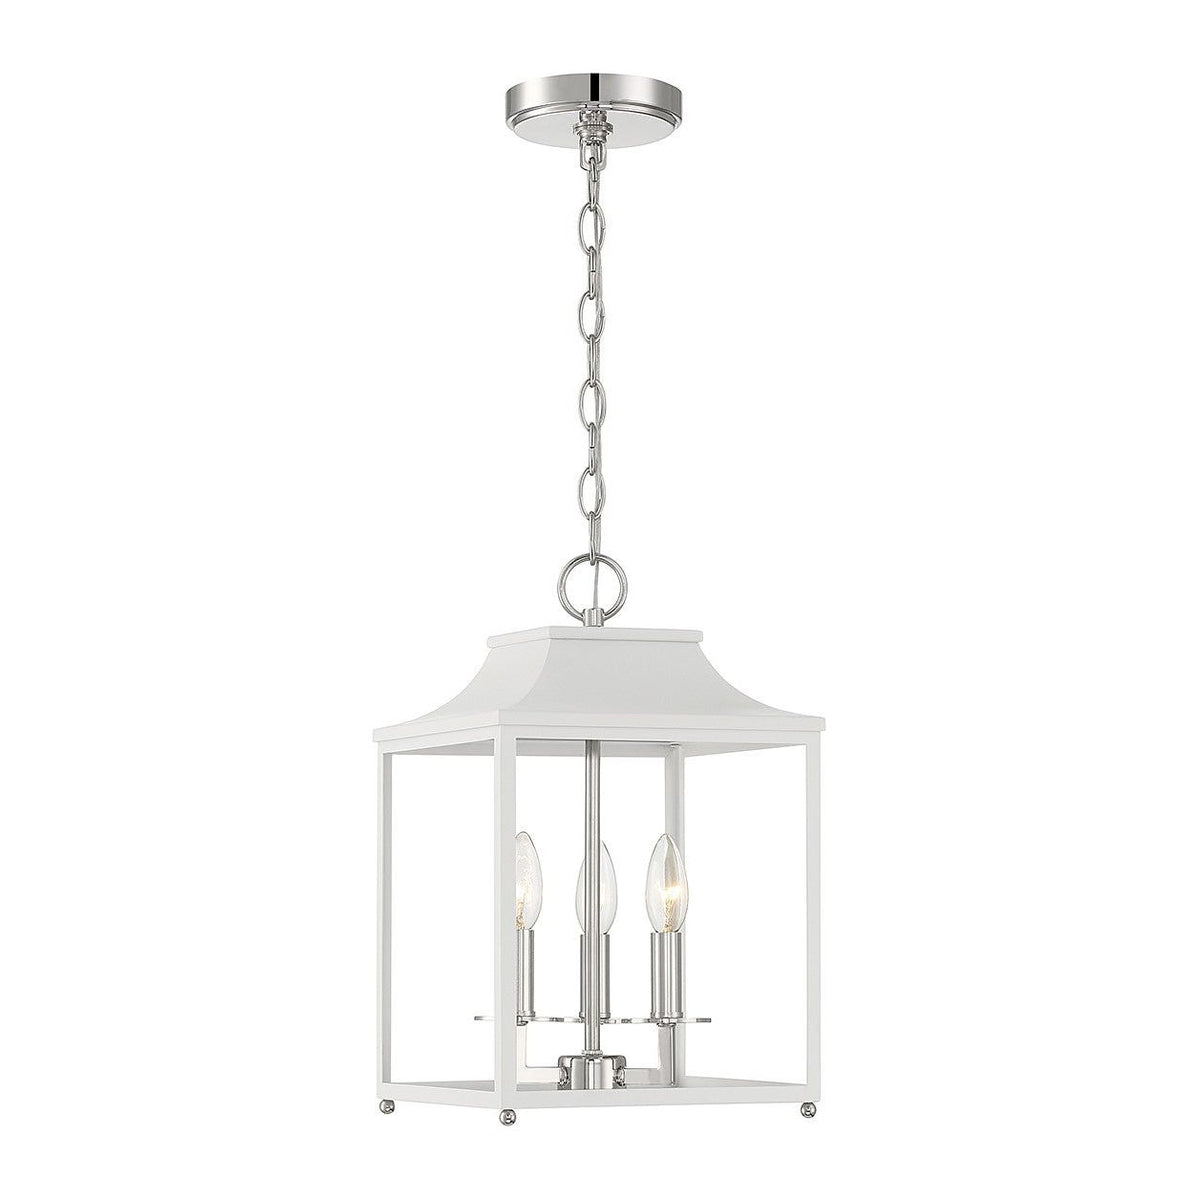 Meridian - M30013WHPN - Three Light Pendant - White with Polished Nickel